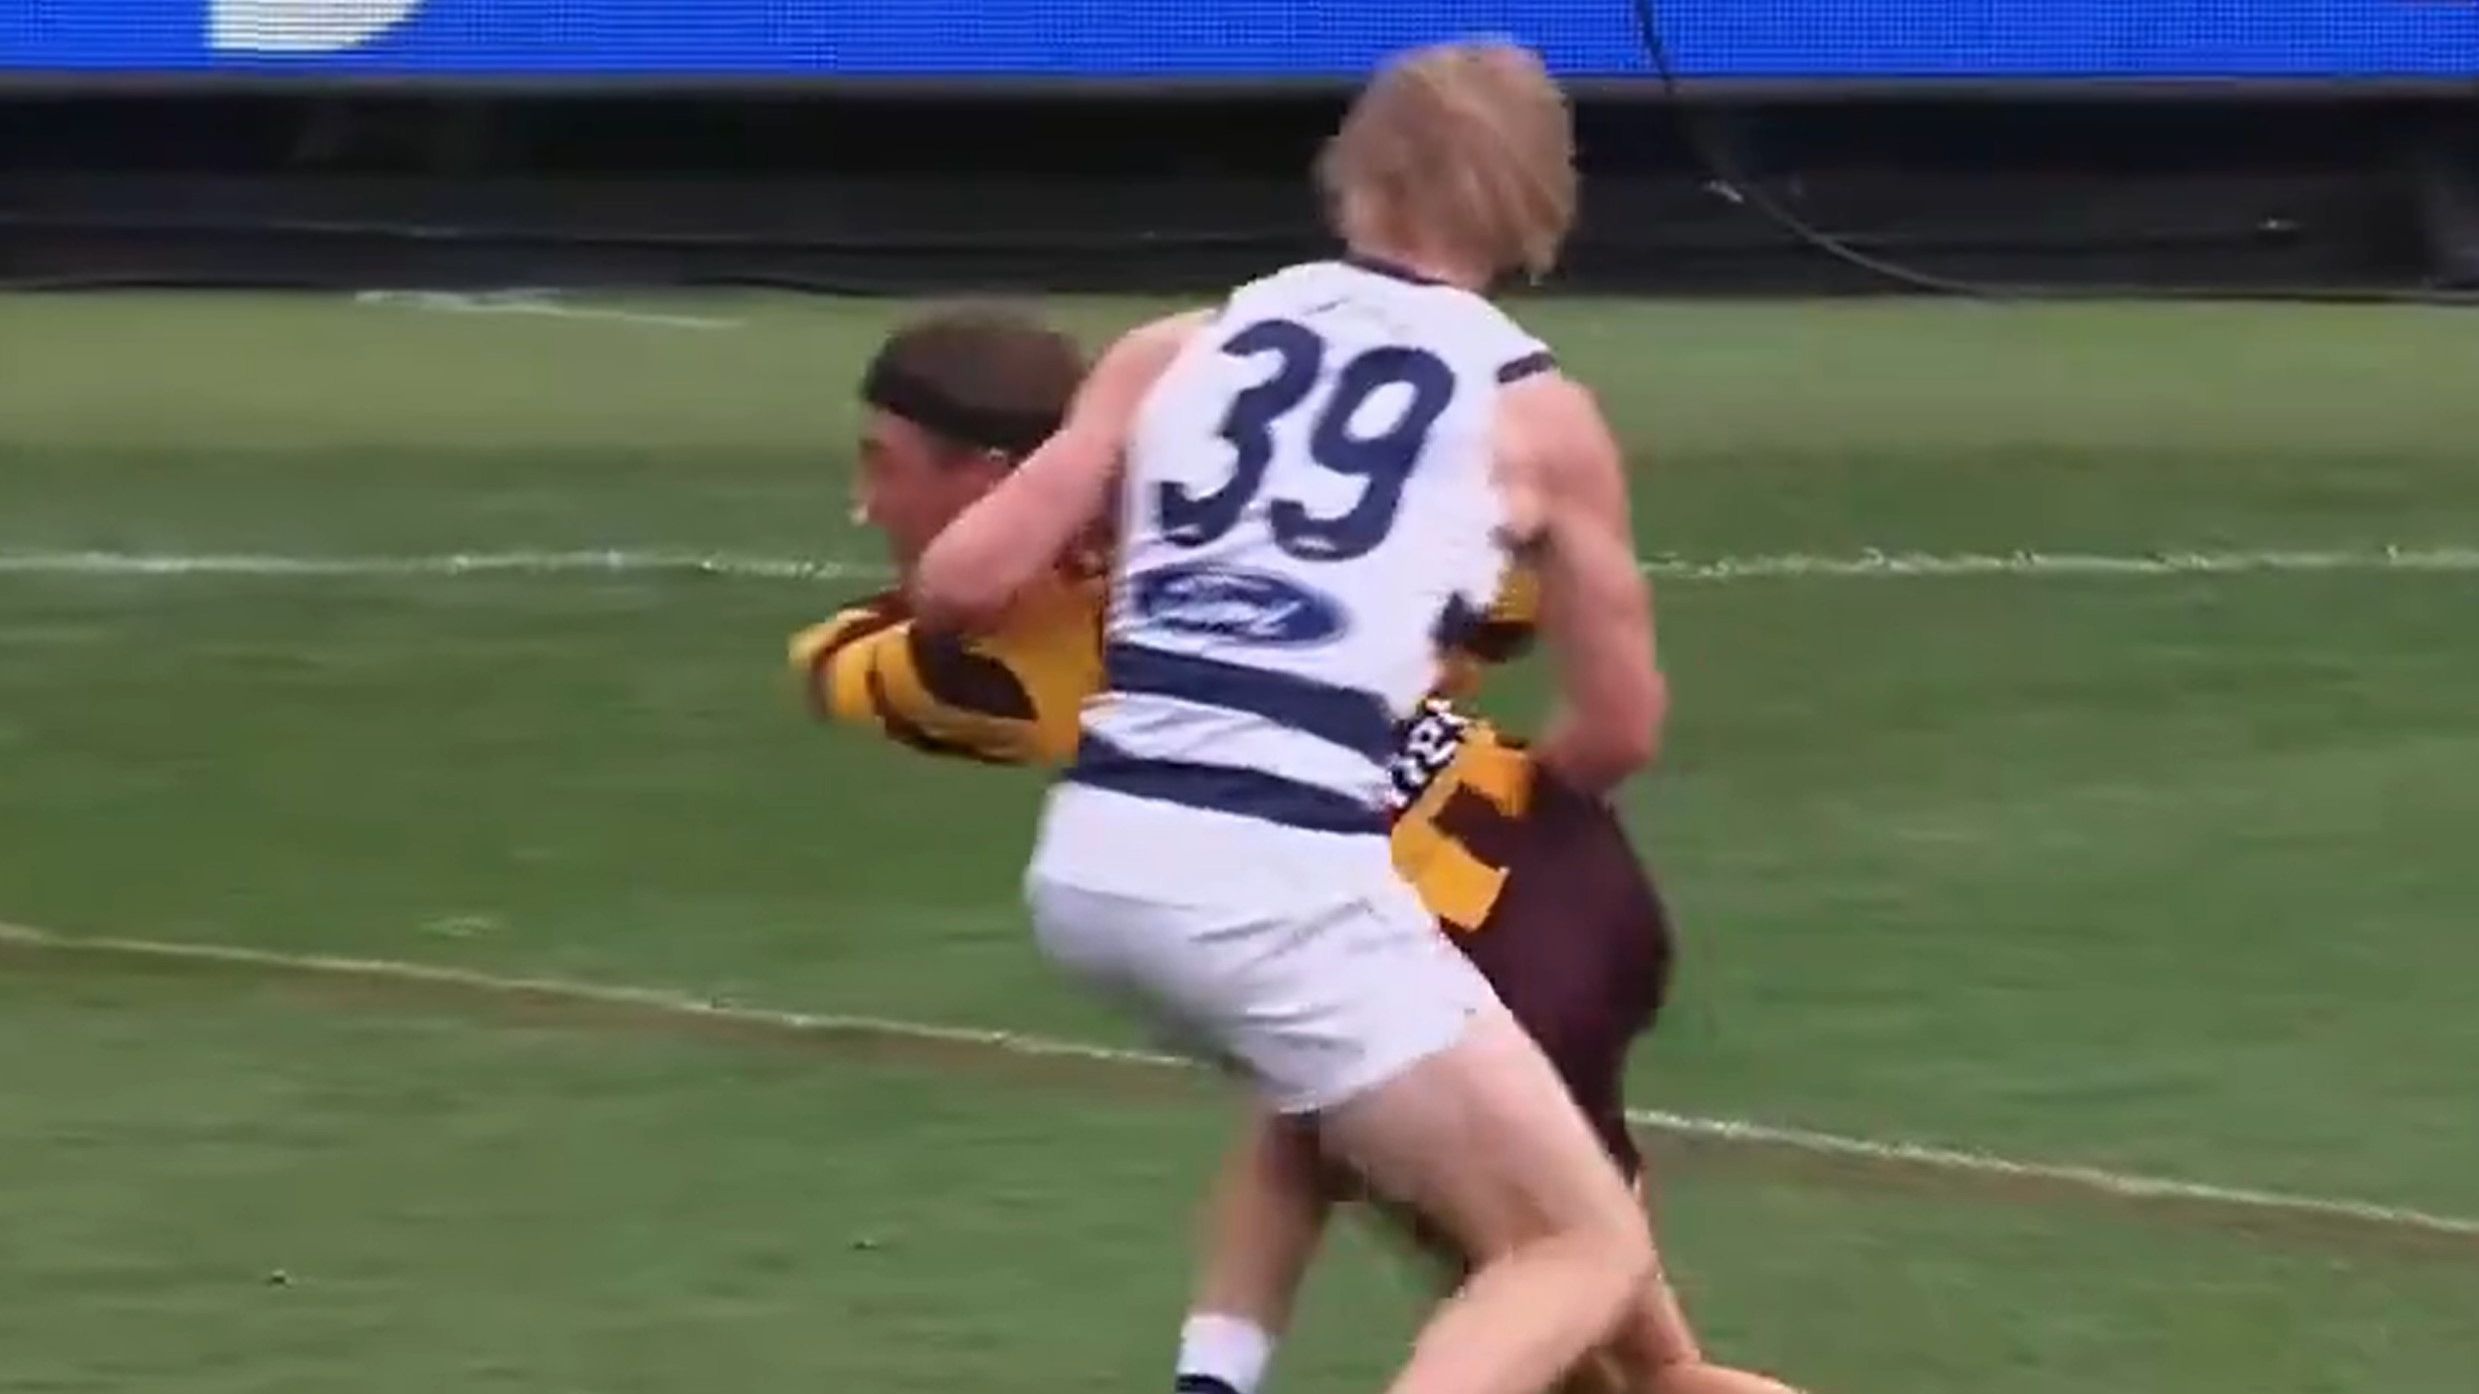 'Never whinge': Hawthorn coach Sam Mitchell reveals what he really thinks of Jack Ginnivan ducking uproar